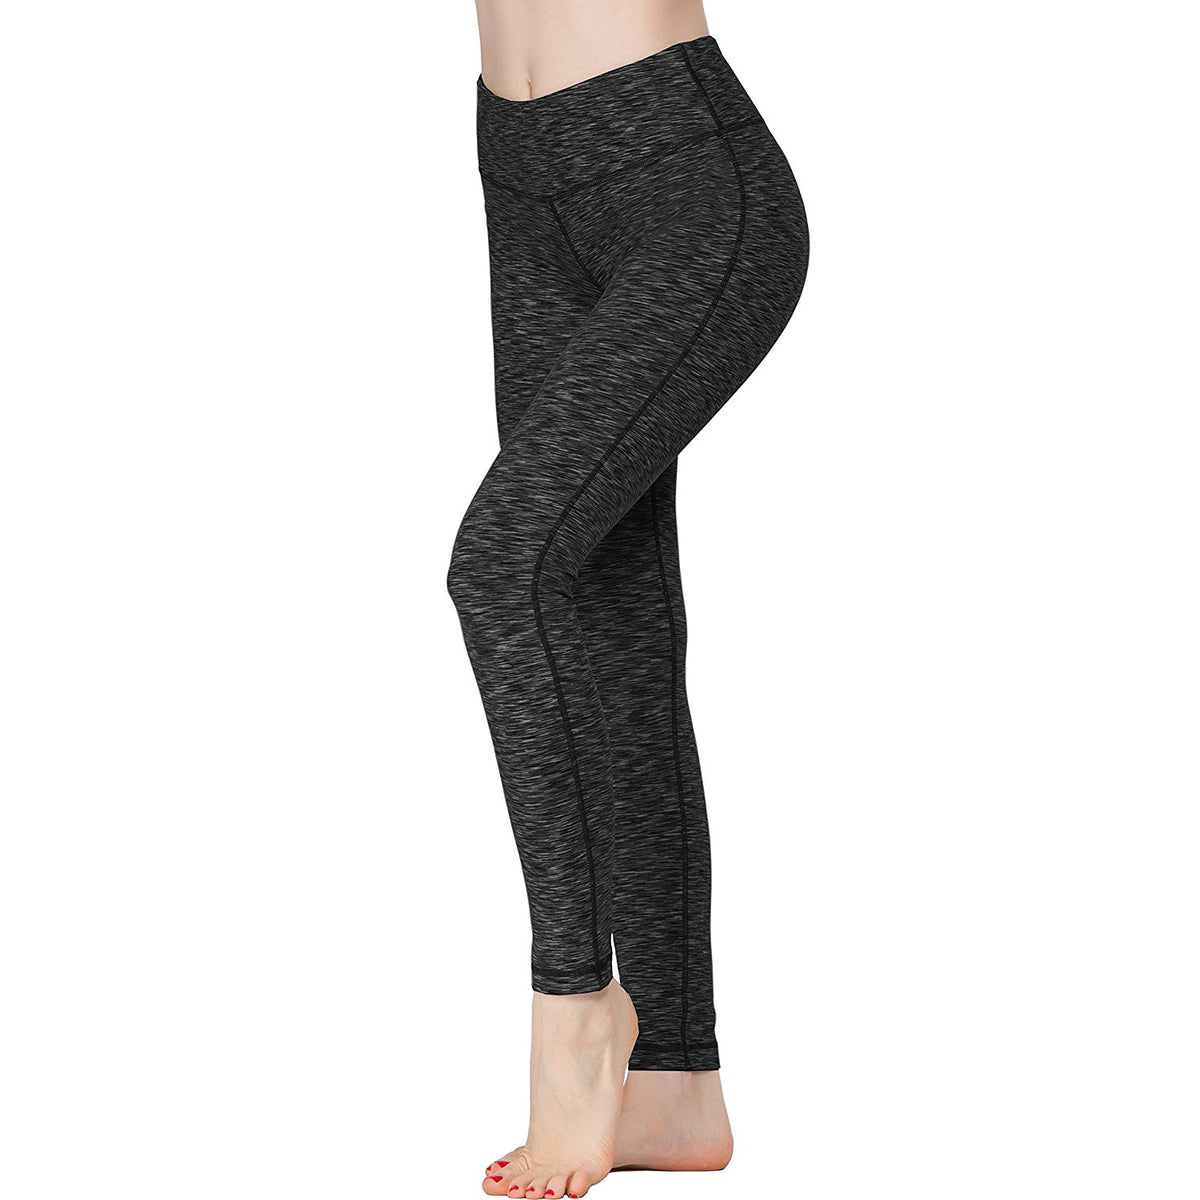 Buy CAROVIA Women's Workout Leggings High Waisted Yoga Pants with Pockets  Buttery Soft 25 inches, Biscuit Cheetah, XX-Small at Amazon.in